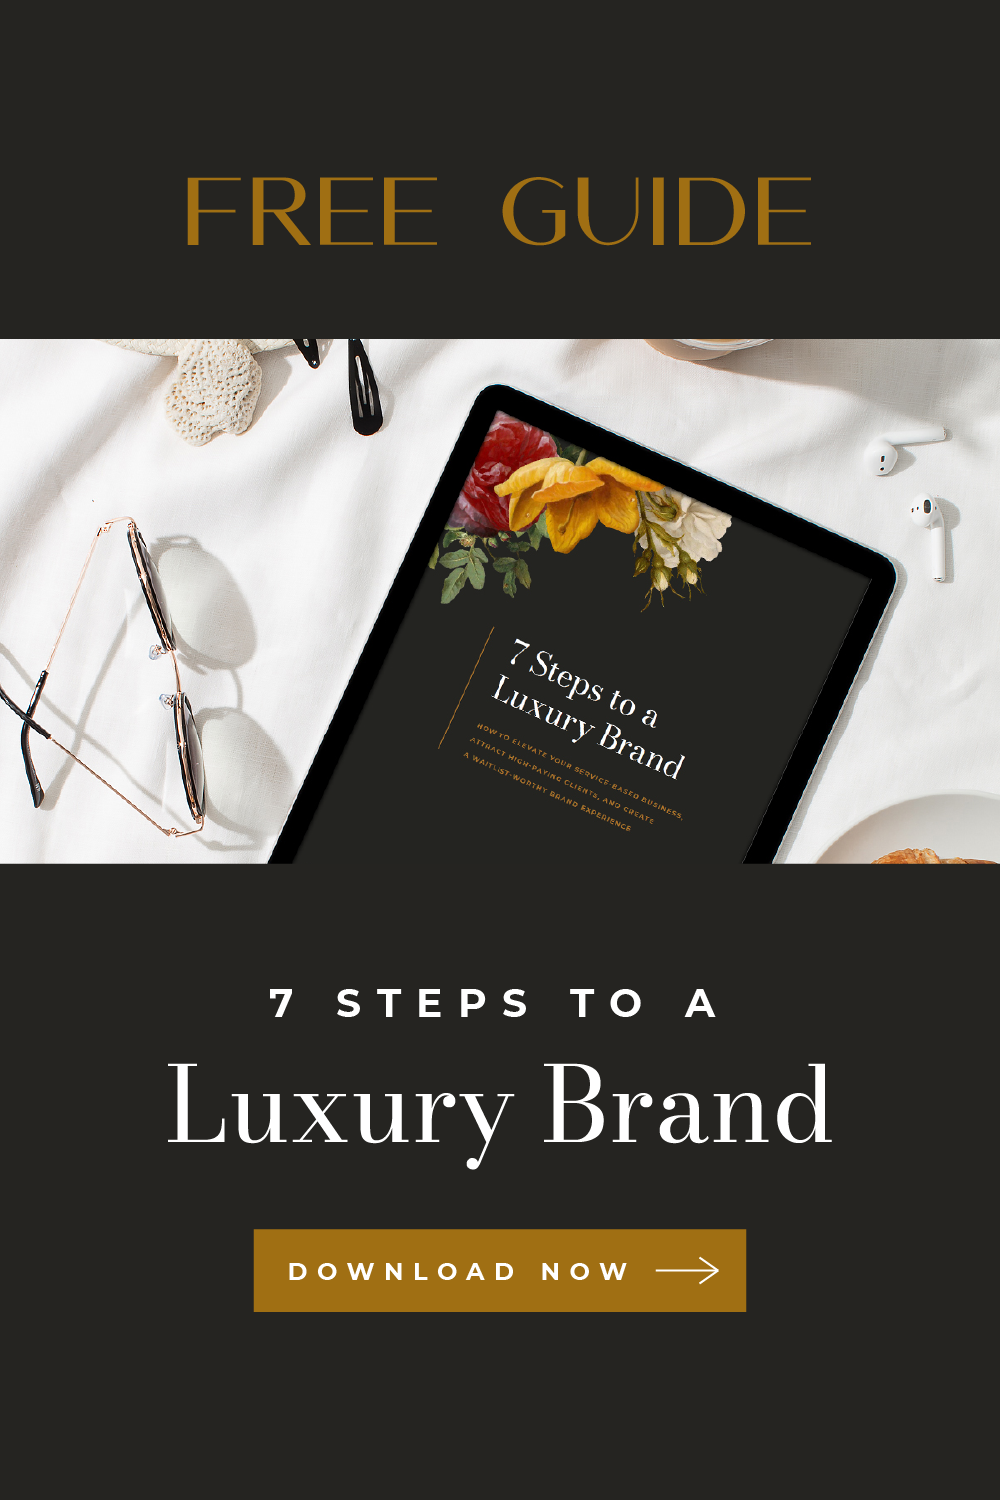 Ready to build your own LUXURY brand? This FREE guide is for you! Download now to learn top luxury branding tips from luxury brand designer and brand strategist Moriah Riona Branding! #luxury #branding #marketing #entrepreneur